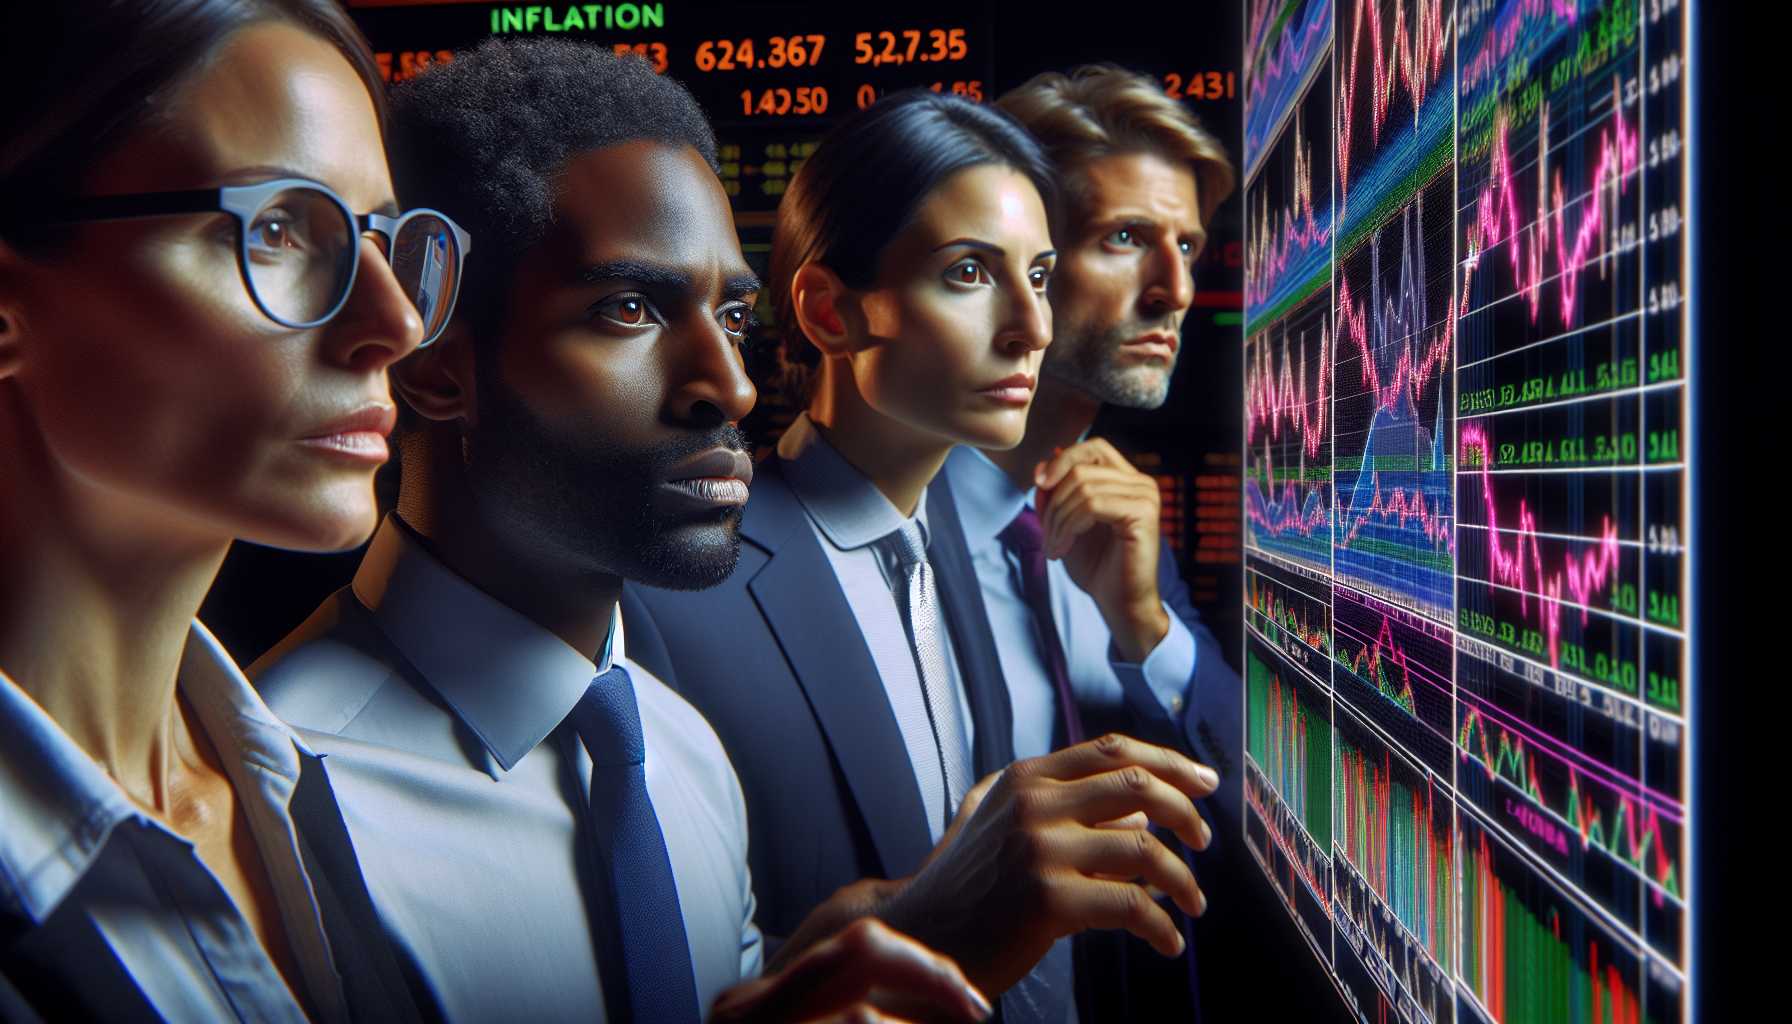 Wall Street traders in front of a digital board showing inflation data and tech stock performances